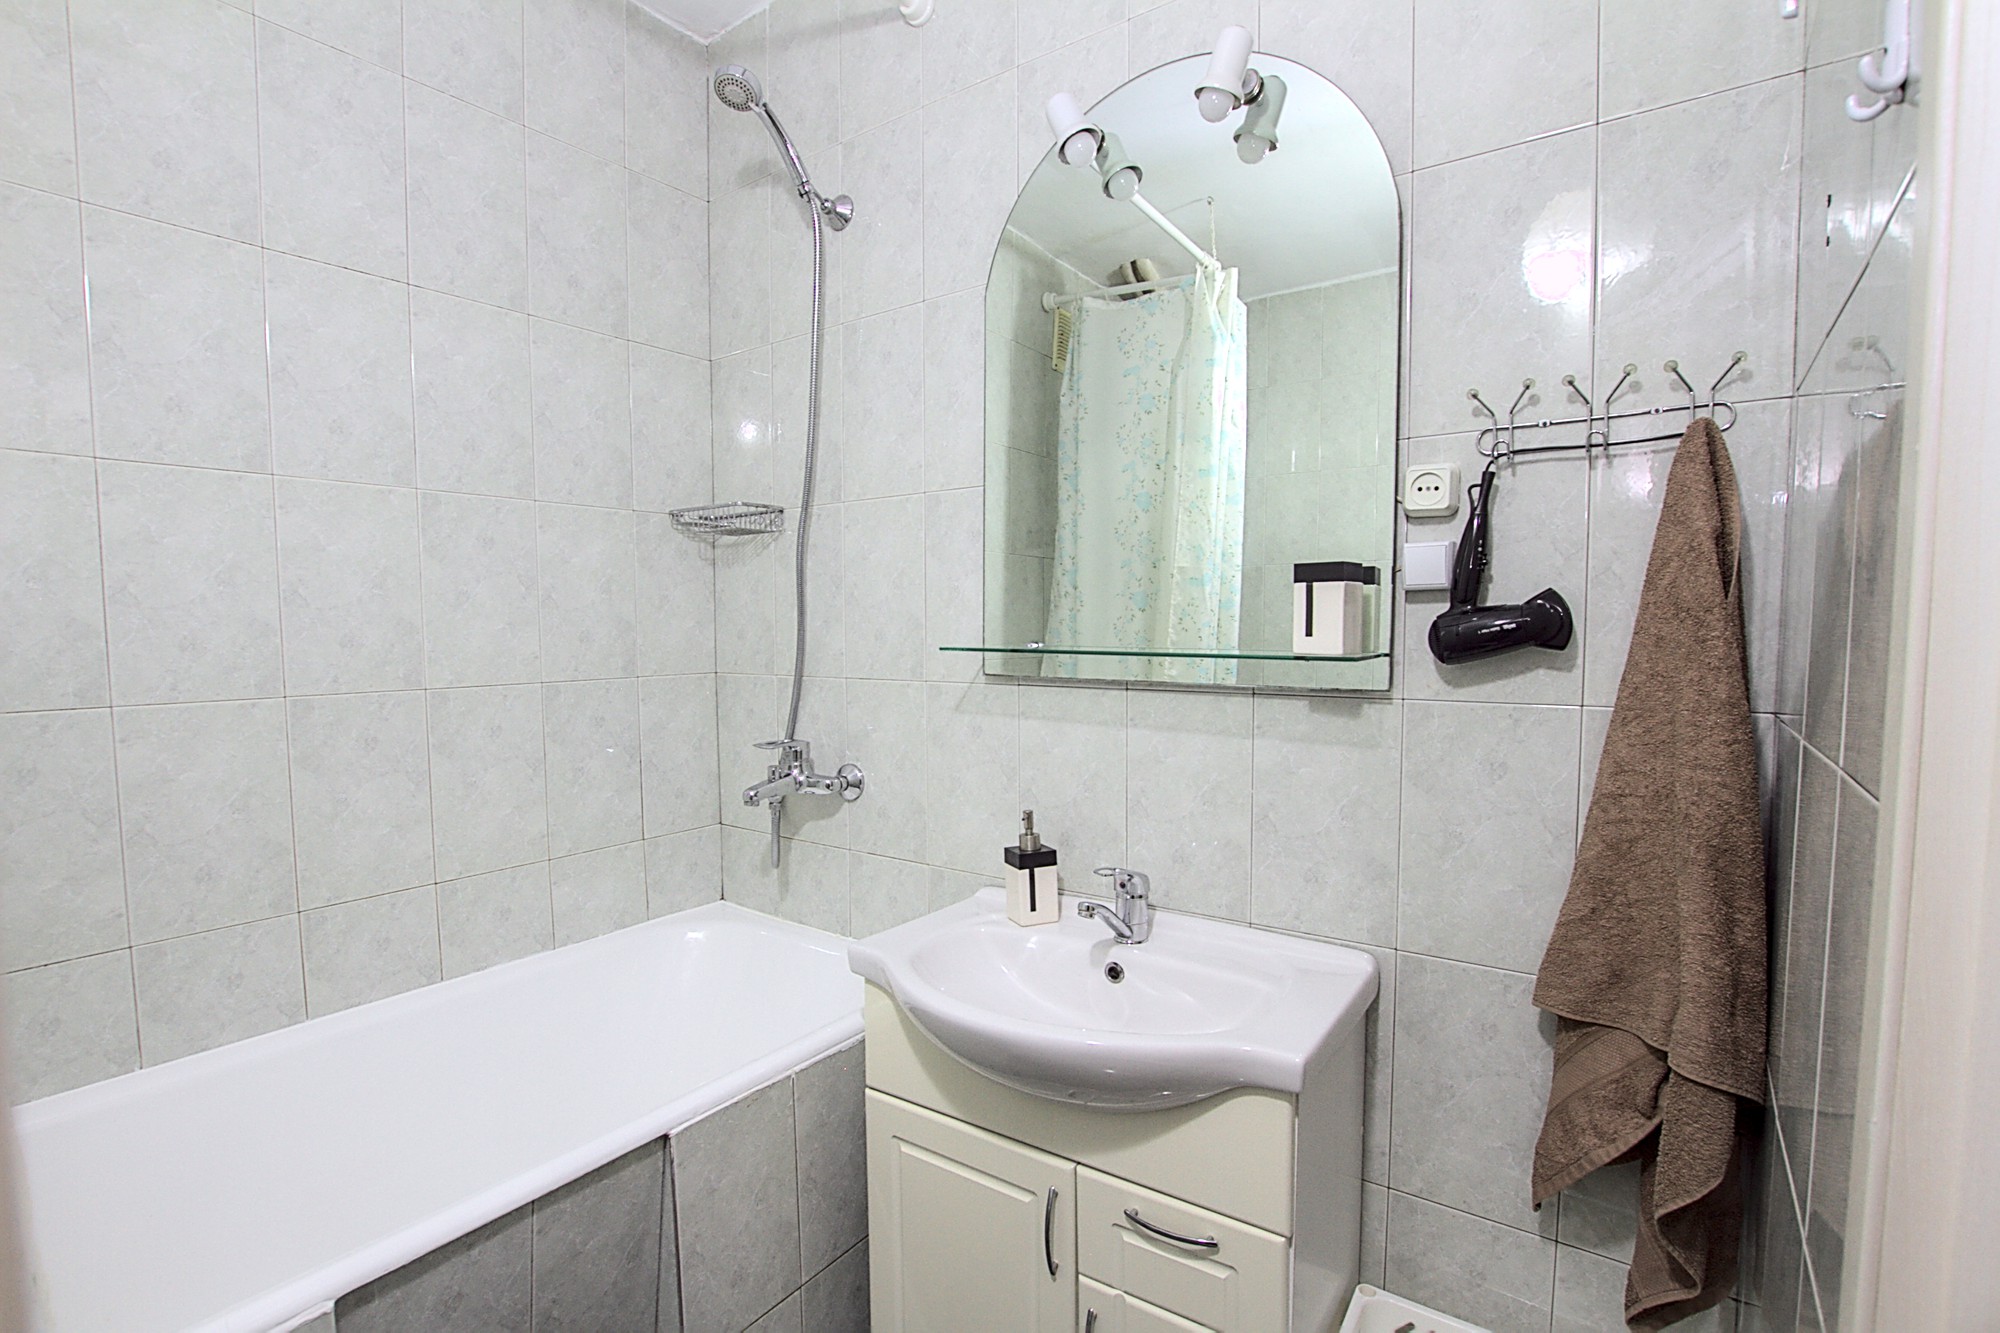 Boulevard Apartment is a 1 room apartment for rent in Chisinau, Moldova